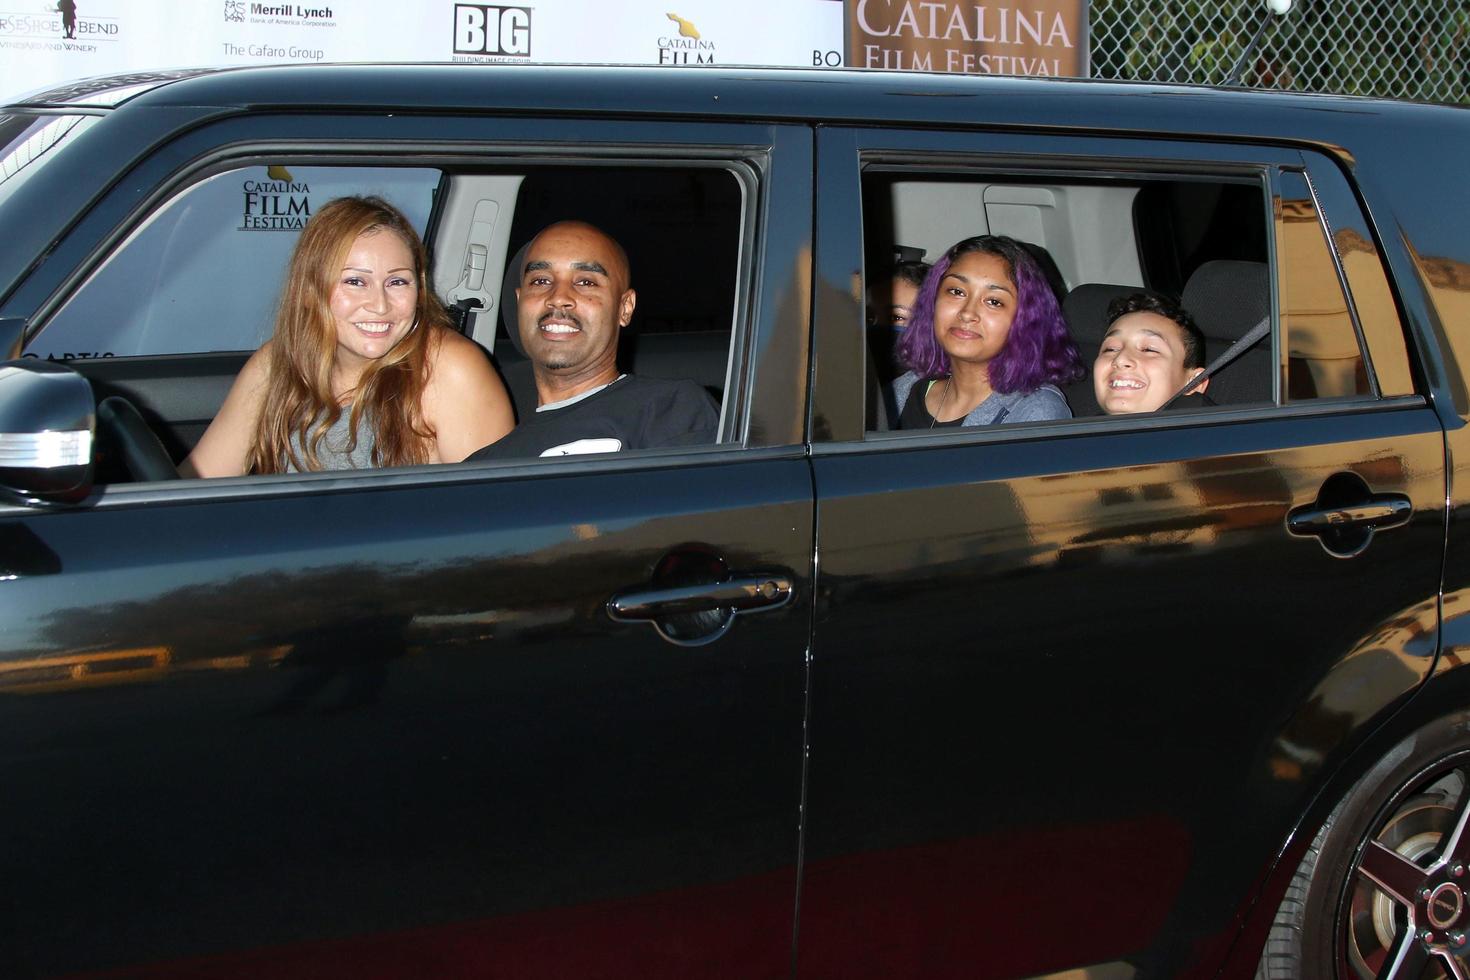 LOS ANGELES  SEP 25 - Guests at the Catalina Film Festival Drive Thru Red Carpet, Friday at the Scottish Rite Event Center on September 25, 2020 in Long Beach, CA photo